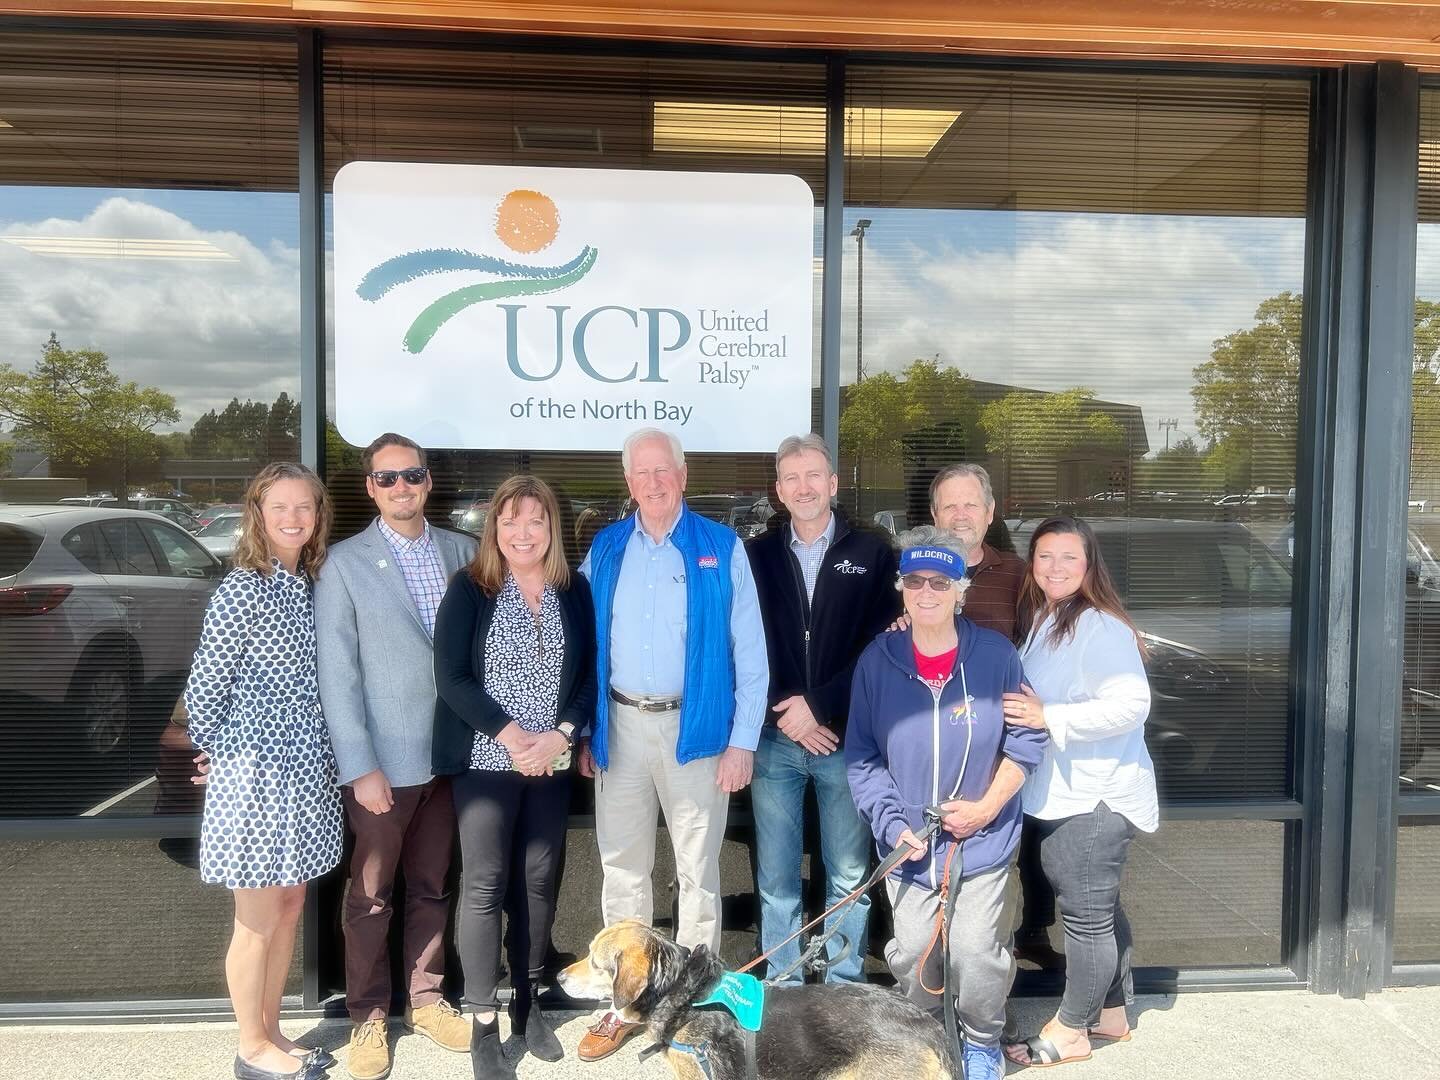 It was a great day at UCPNB with Congressman Mike Thompson! From exploring treasures at our Flipside Thrift Store to witnessing the incredible work being done at OADS and the Senior Day Programs. It was an honor to have him with us!  Thank you Congre